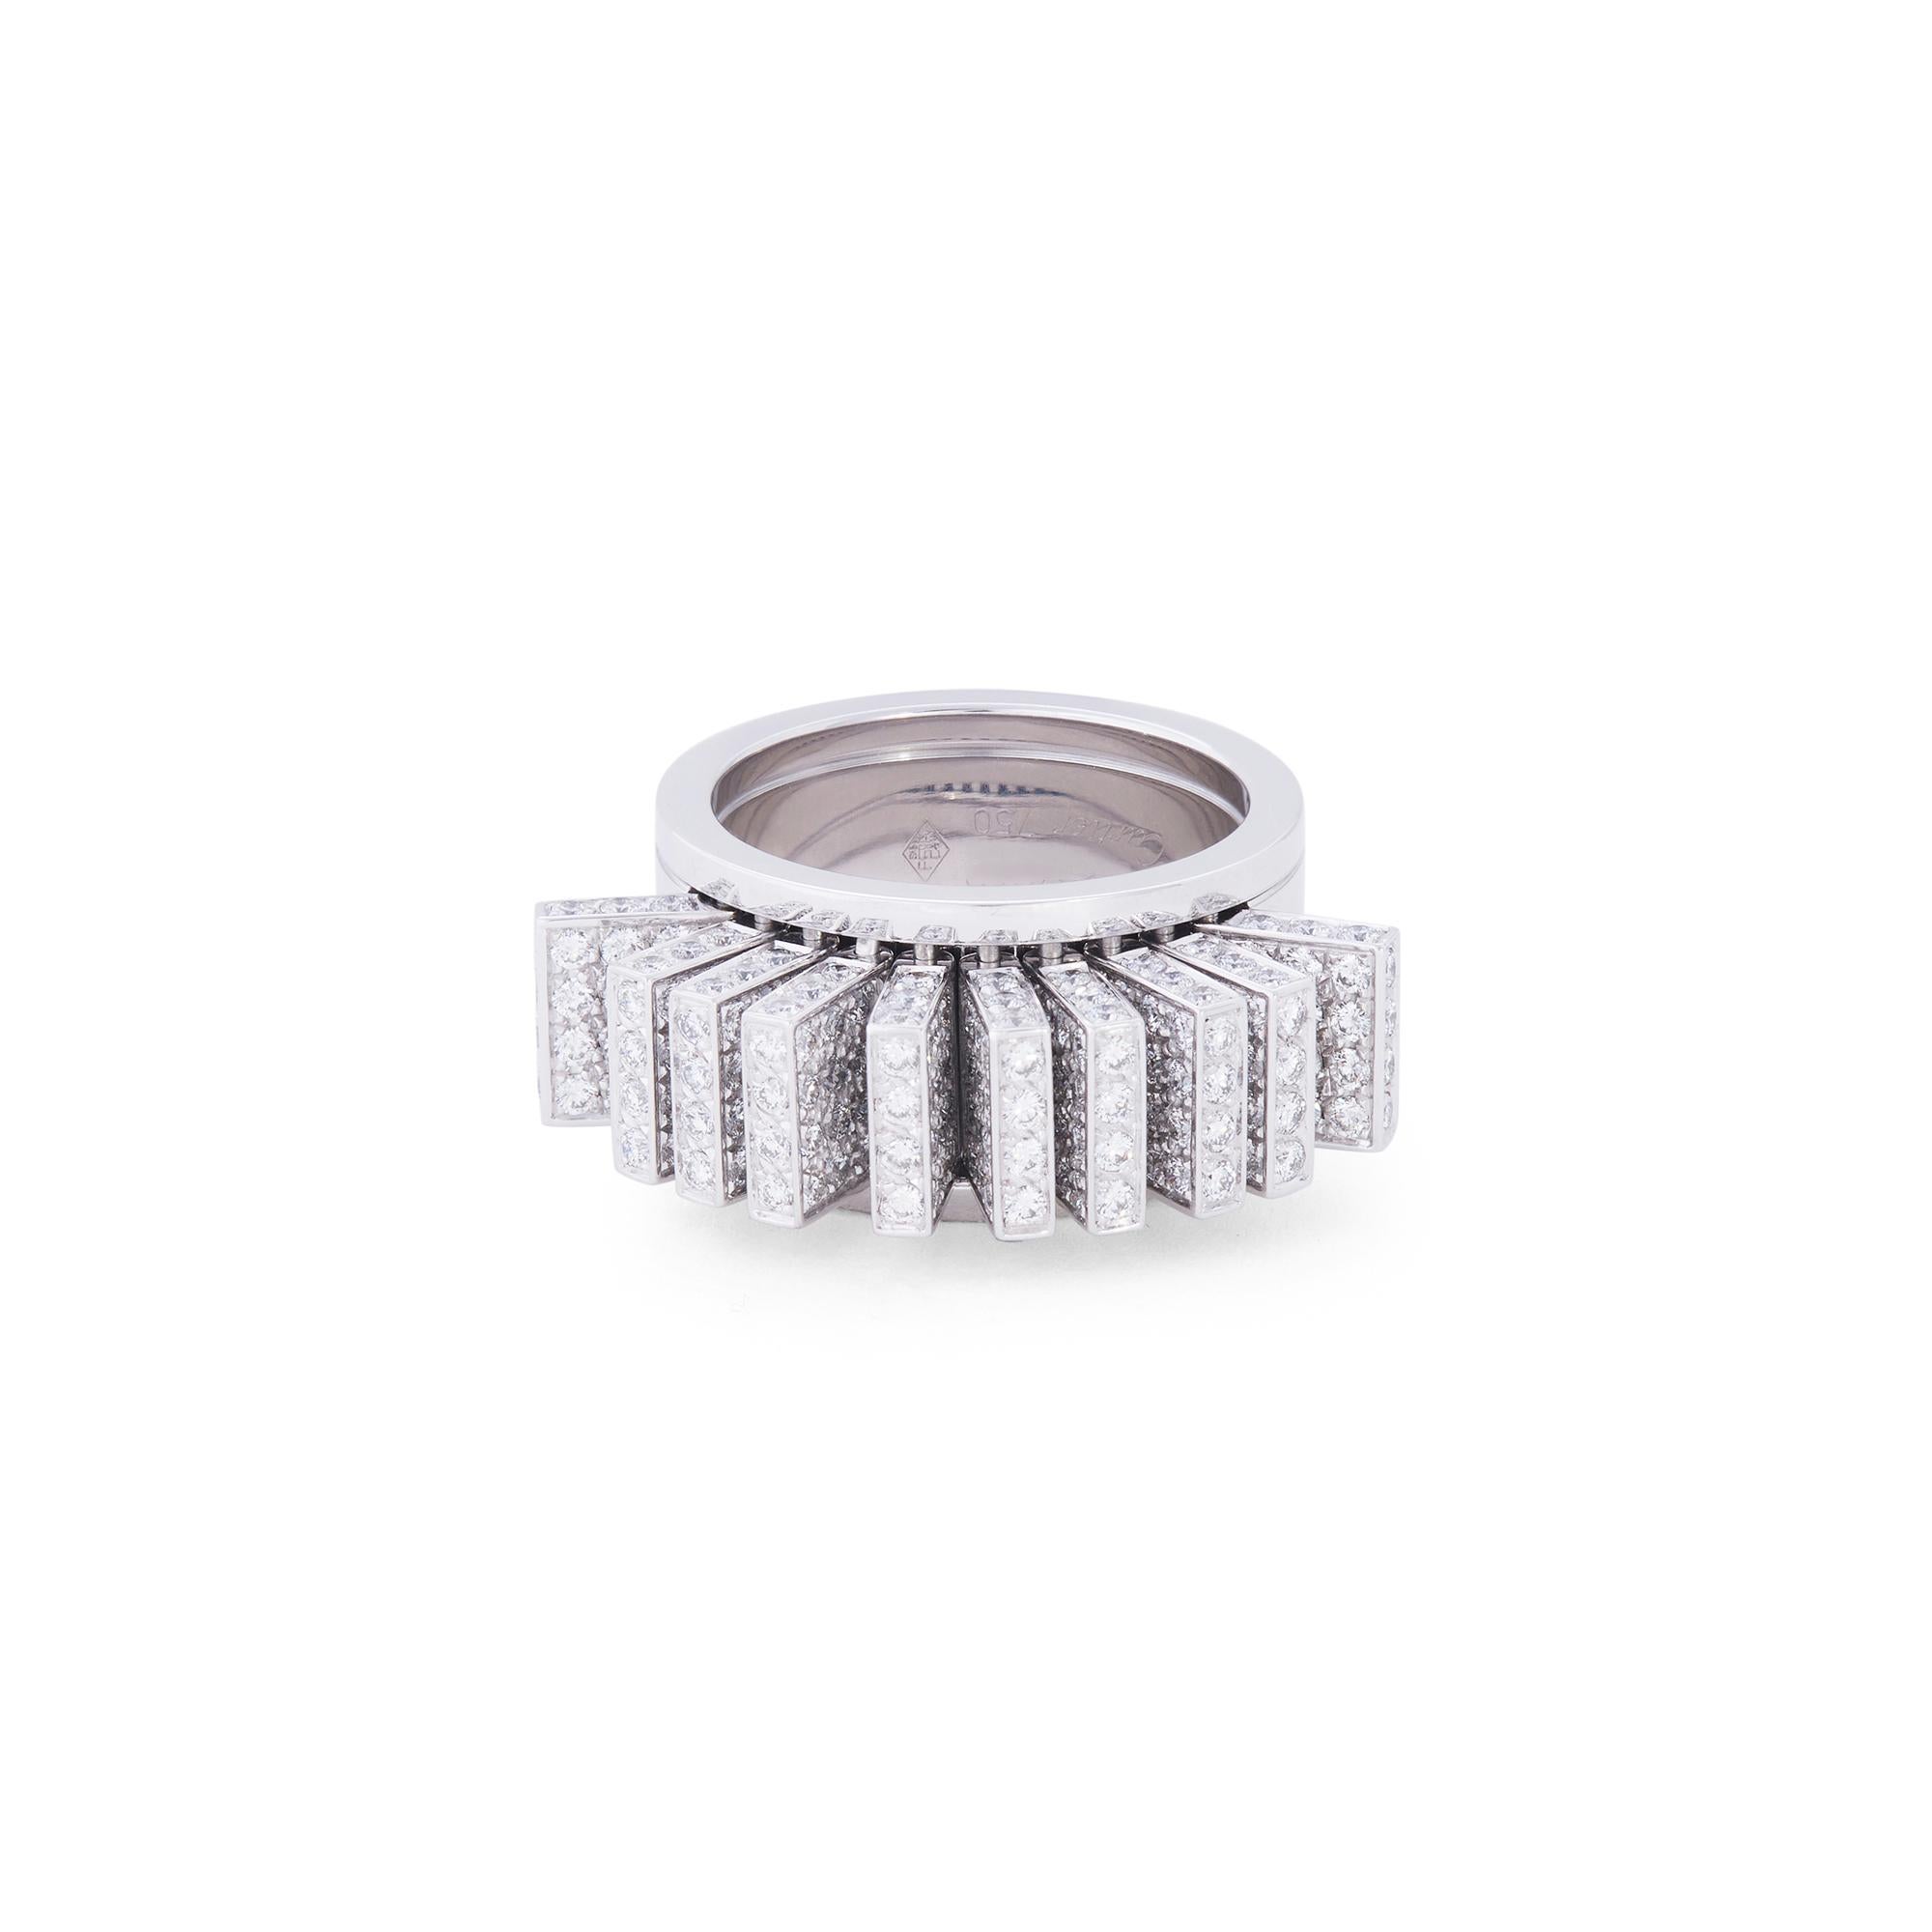 Contemporary Cartier 'Paillettes' White Gold Diamond Ring